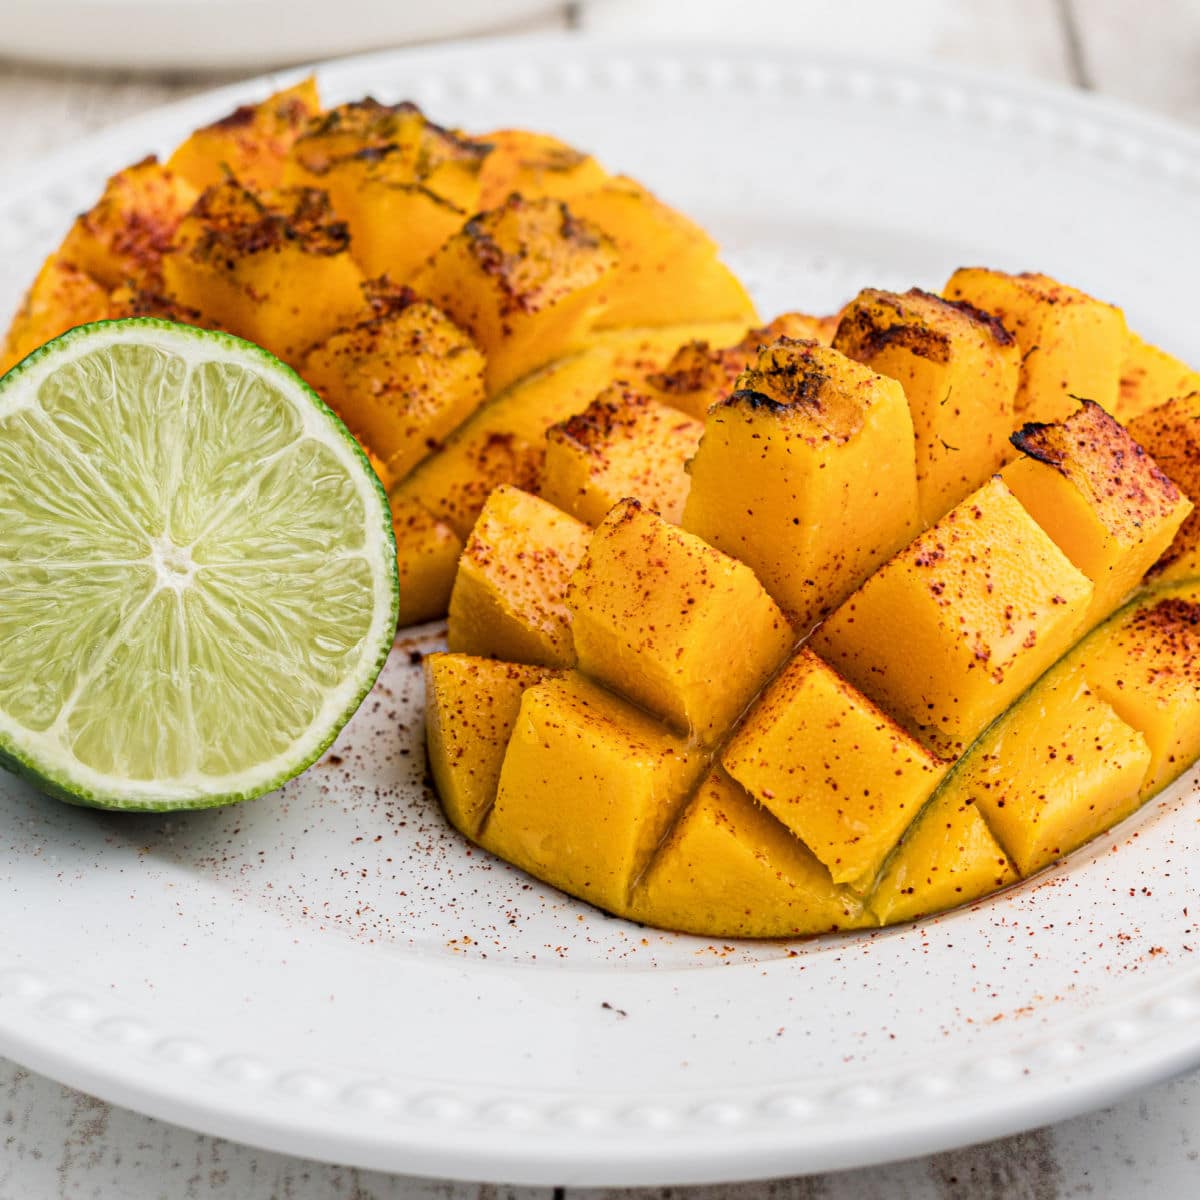 A close up of a plate with two pieces of grilled mango and a lime.